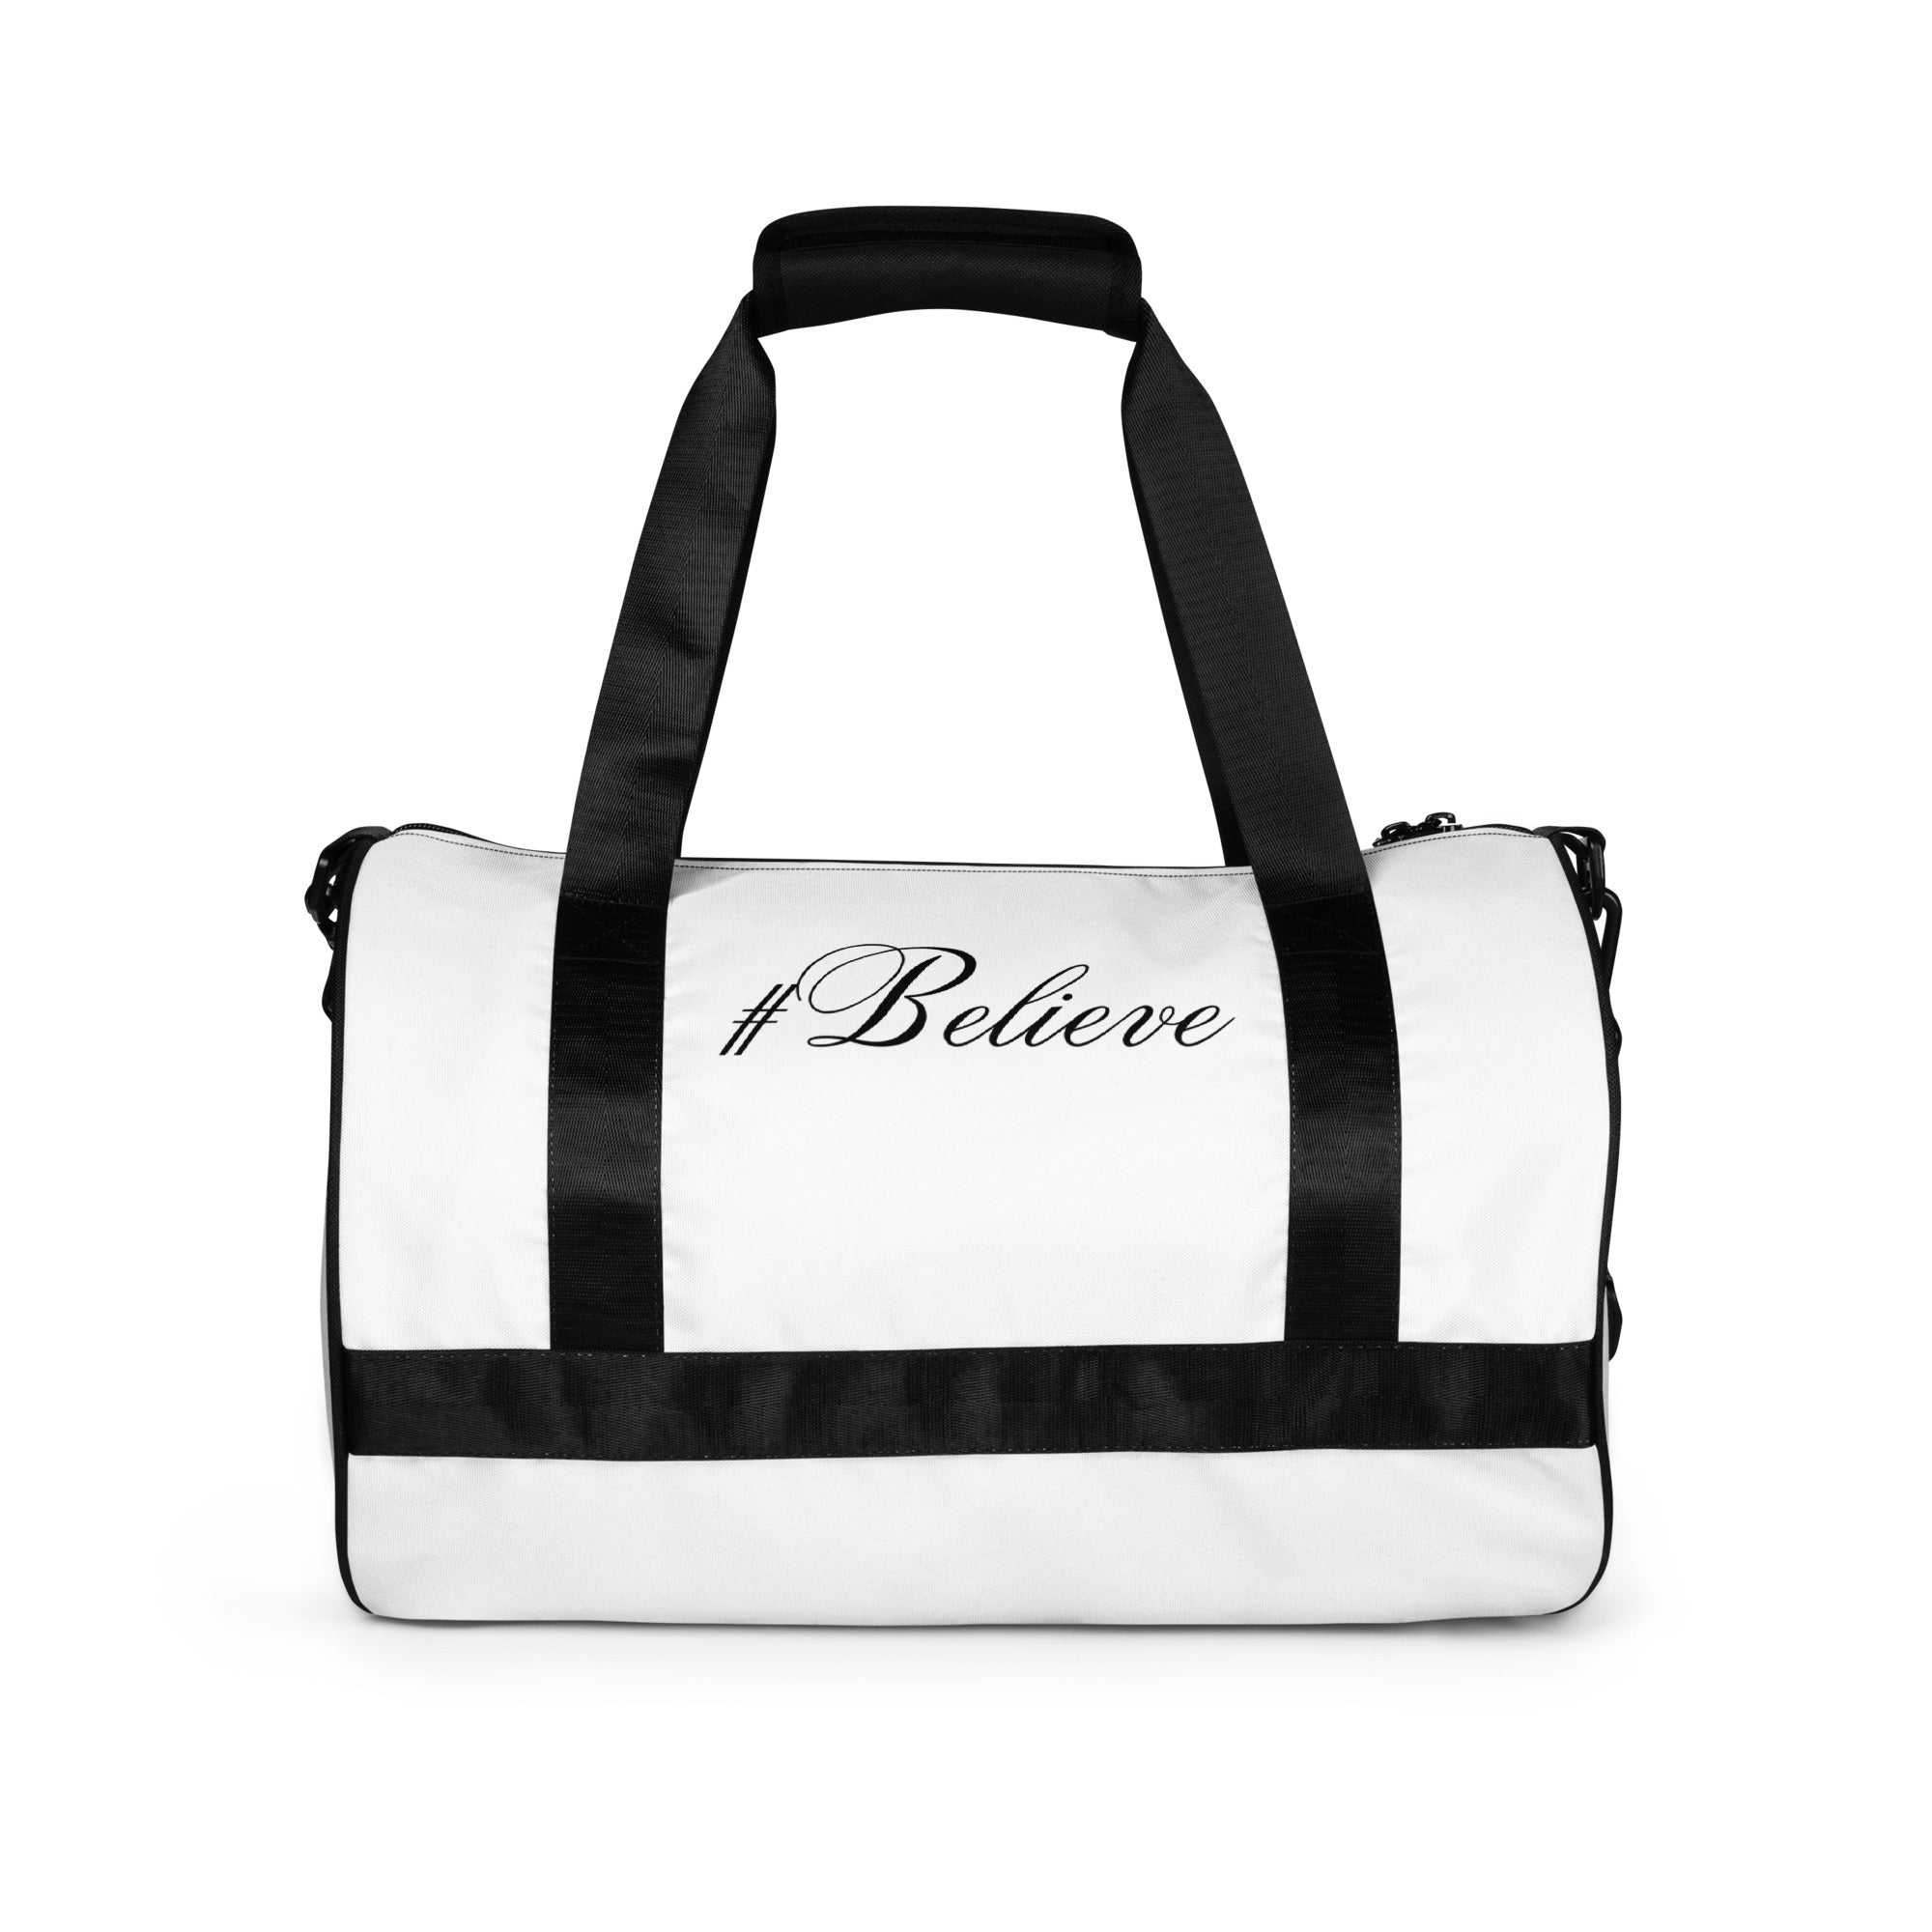 #Believe All-over print gym bag